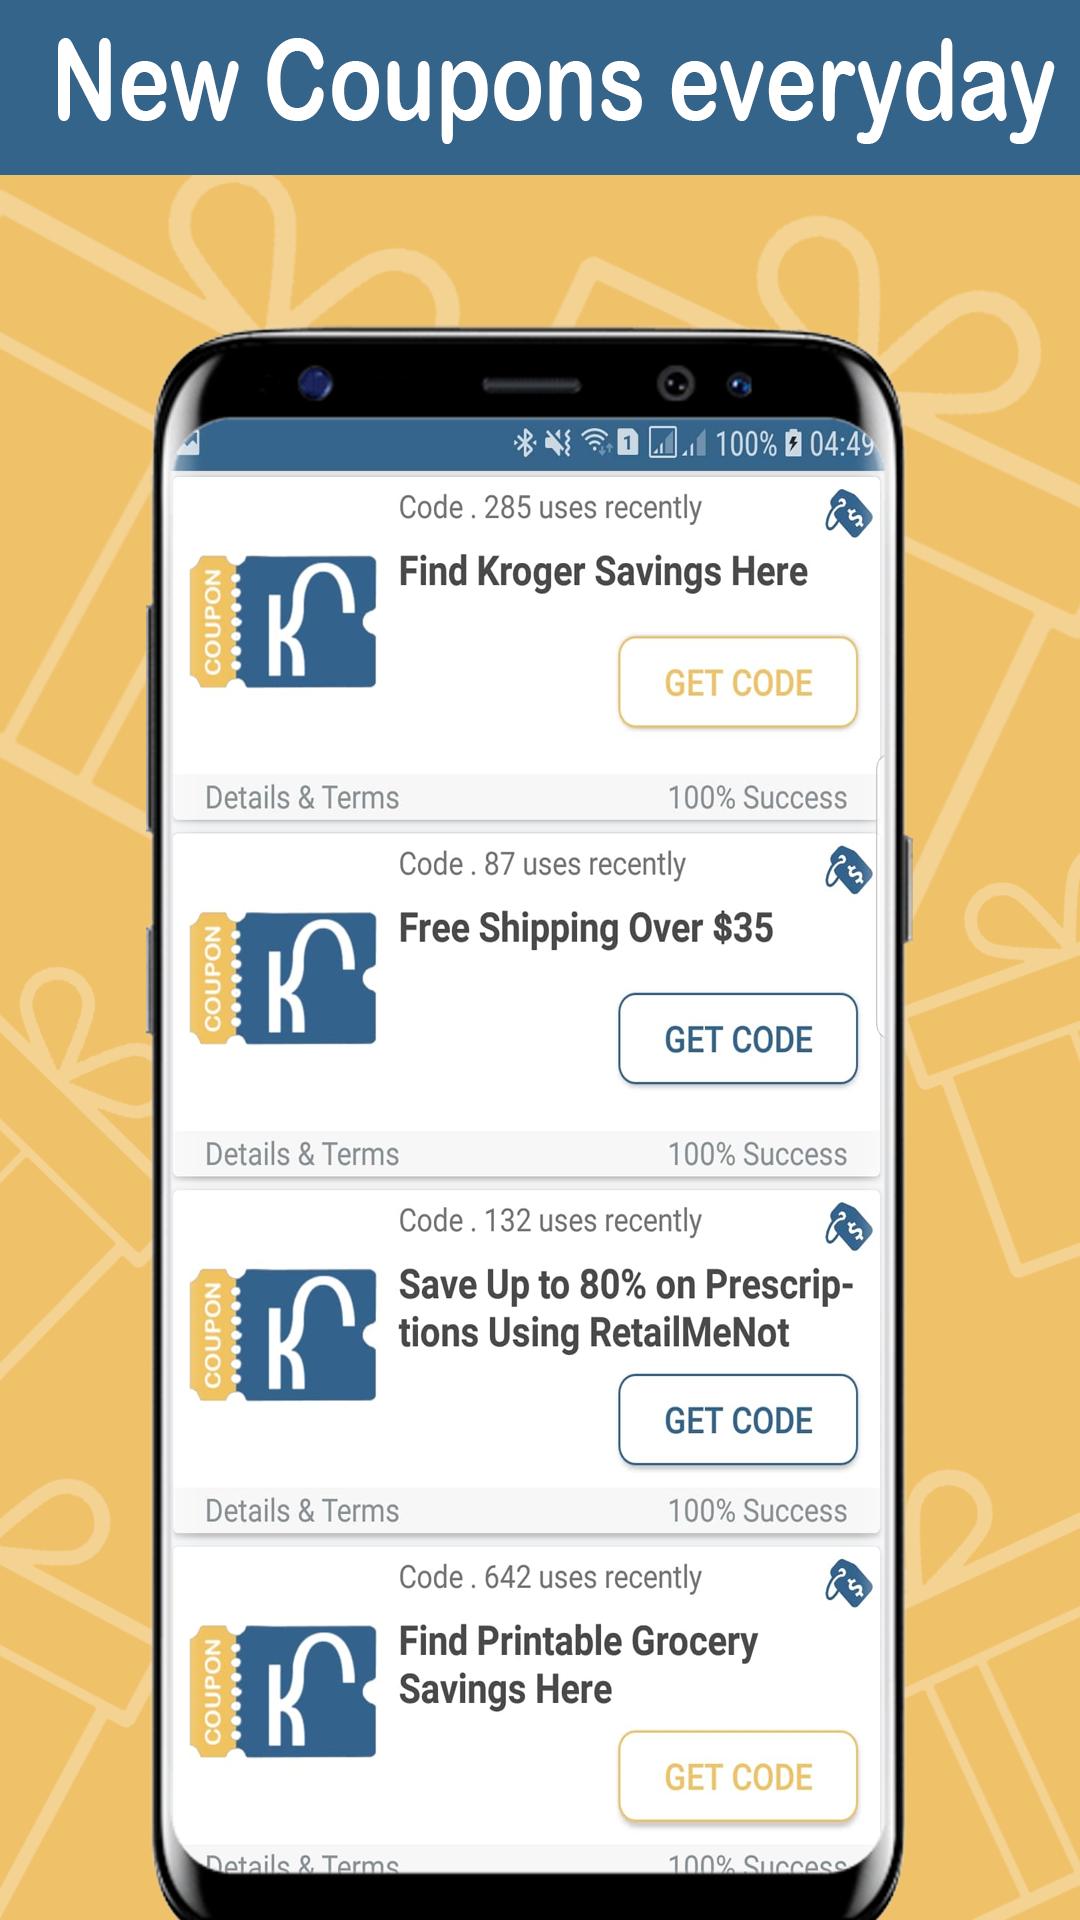 Coupons For Kroger Promo Code Deals Promotion For Android Apk Download - best sites to find roblox promo codes hi tech gazette